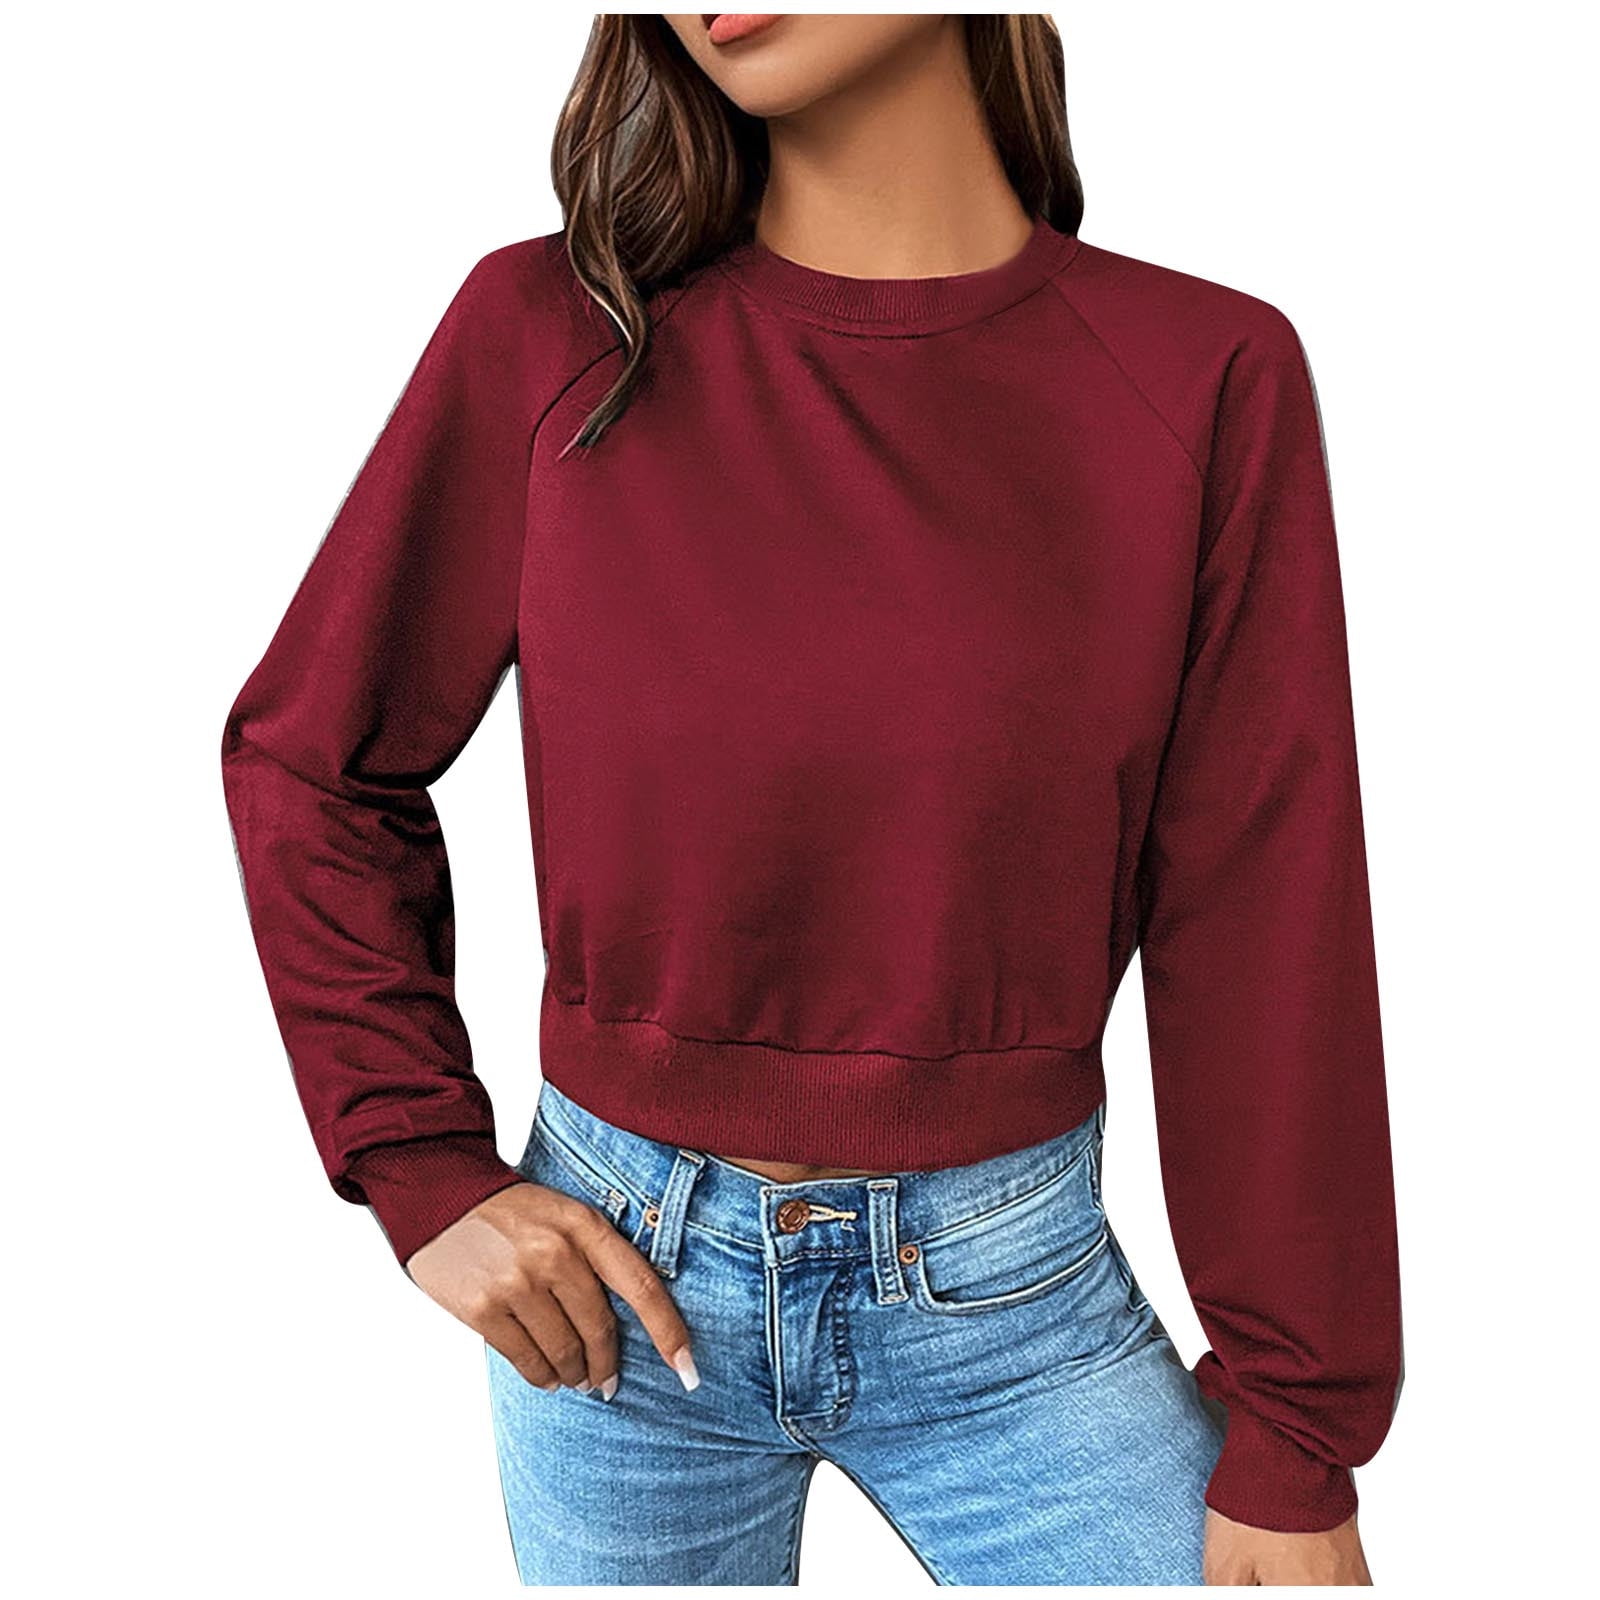 Binmer Fashion Gradient Color Crewneck Sweatshirts for Womens Casual Long  Sleeve Blouse Loose Comfy Lightweight Shirts Tops